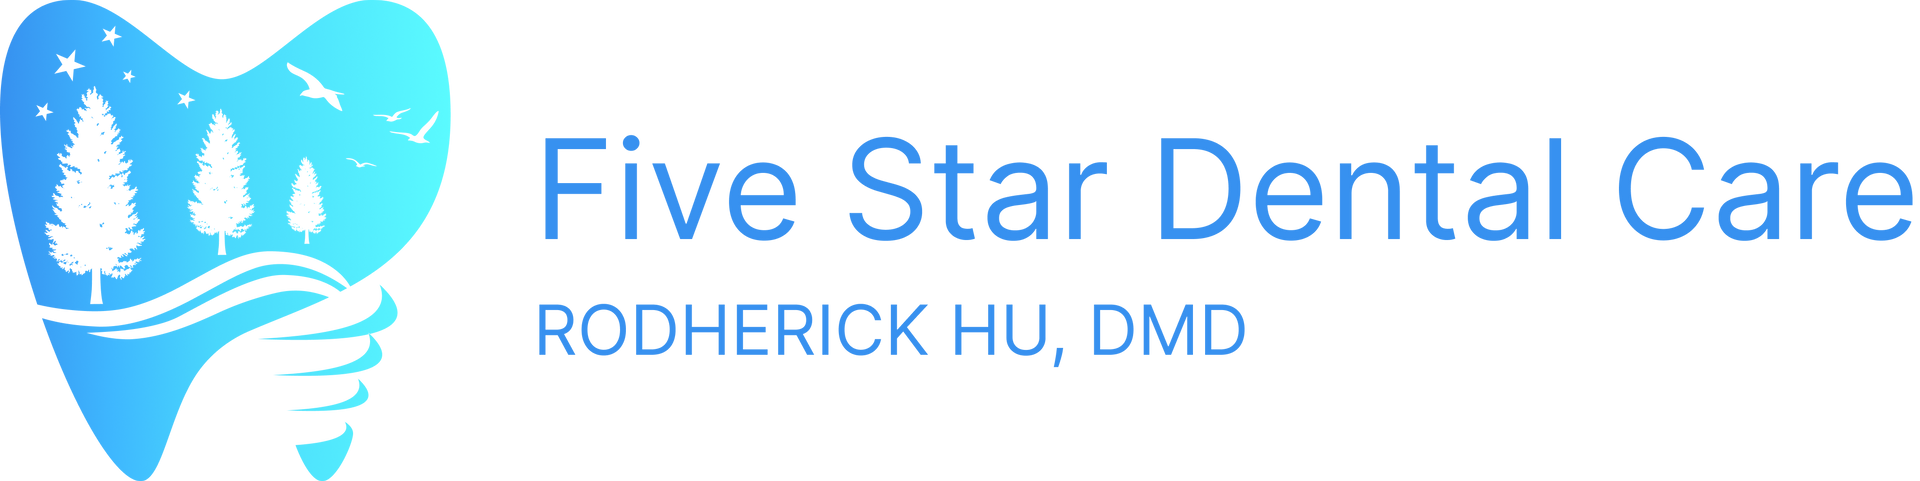 Five Star Dental Care logo link to Welcome page